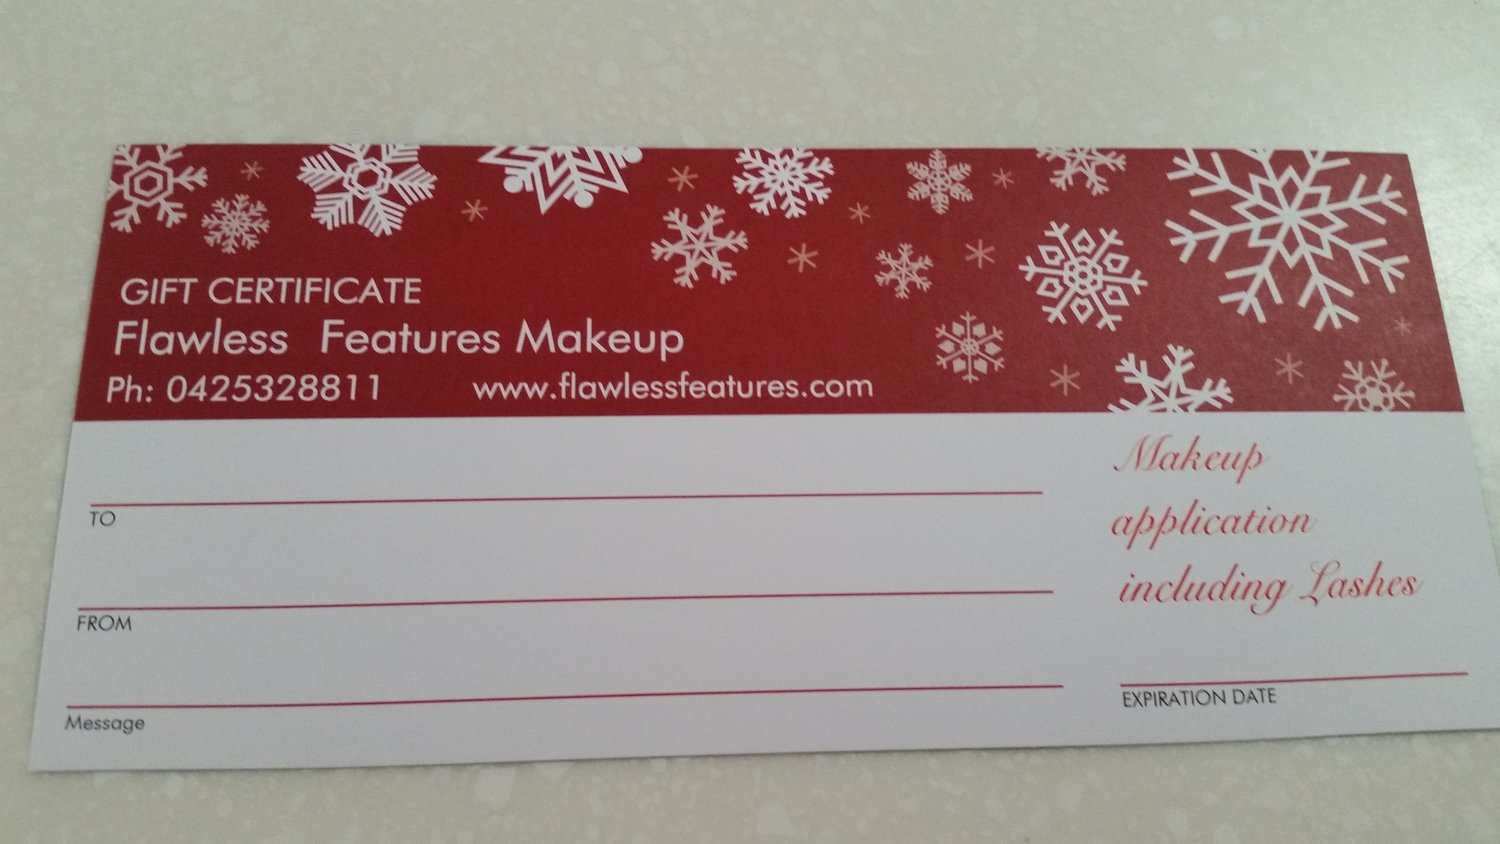 Gift Voucher for hair and makeup application